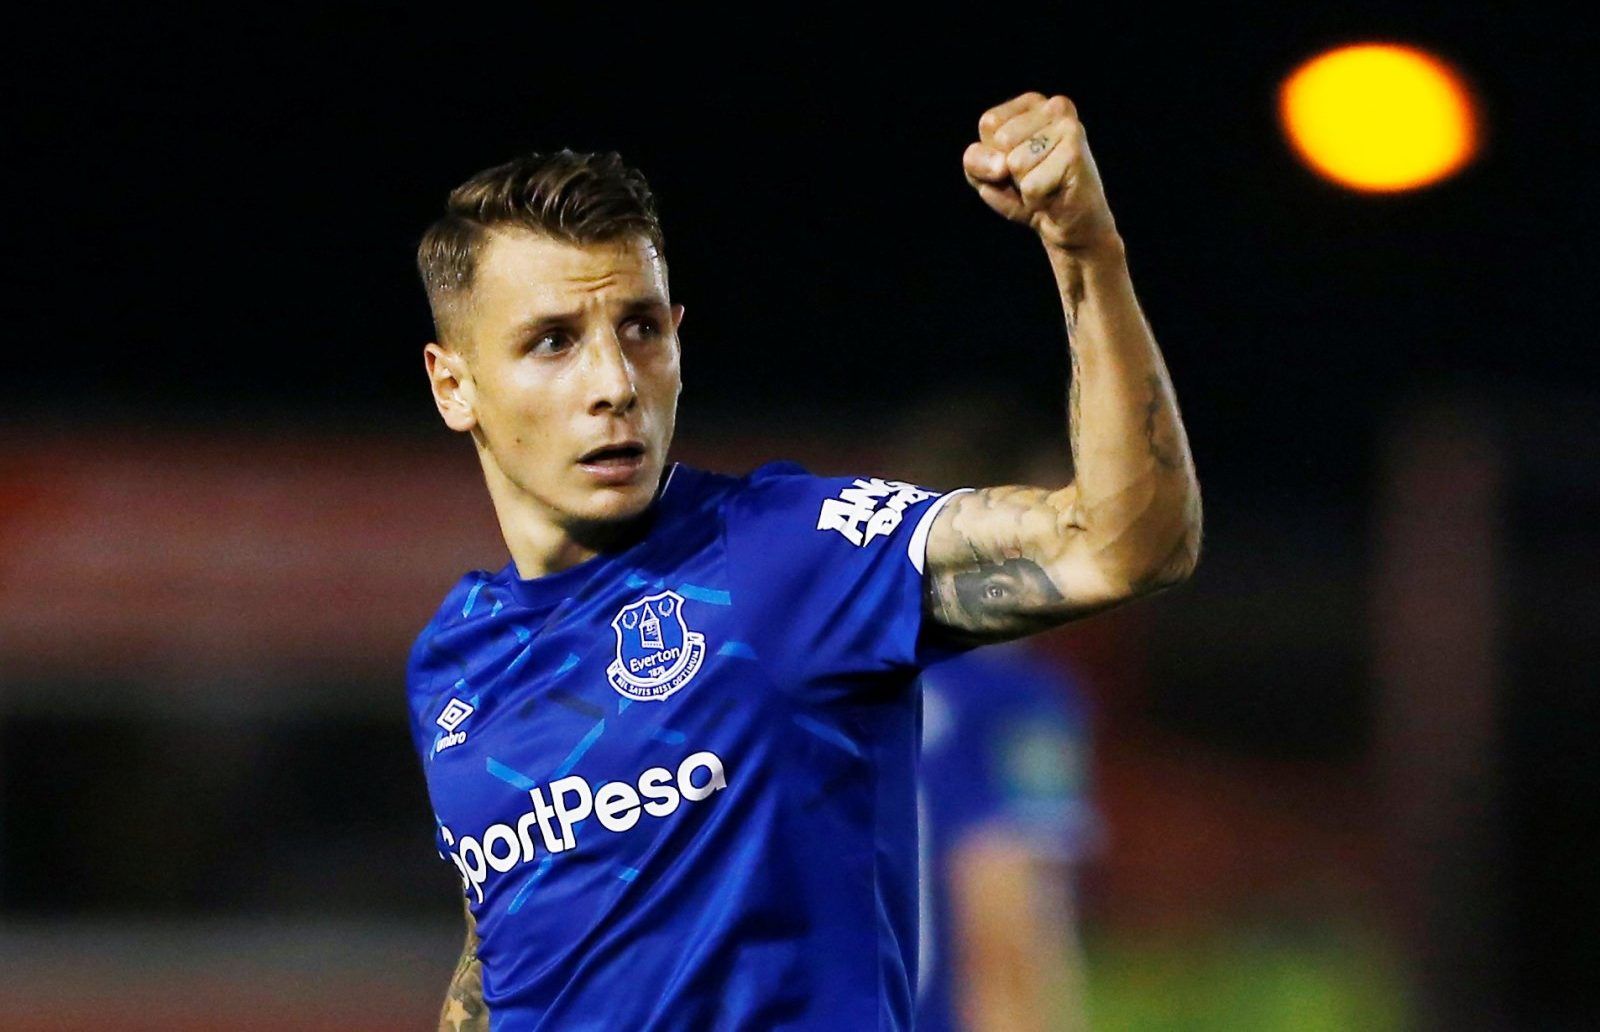 Evertons-Lucas-Digne-celebrates-scoring-their-first-goal-Carabao-Cup-Second-Round-v-Lincoln-City-e1569347395681.jpg